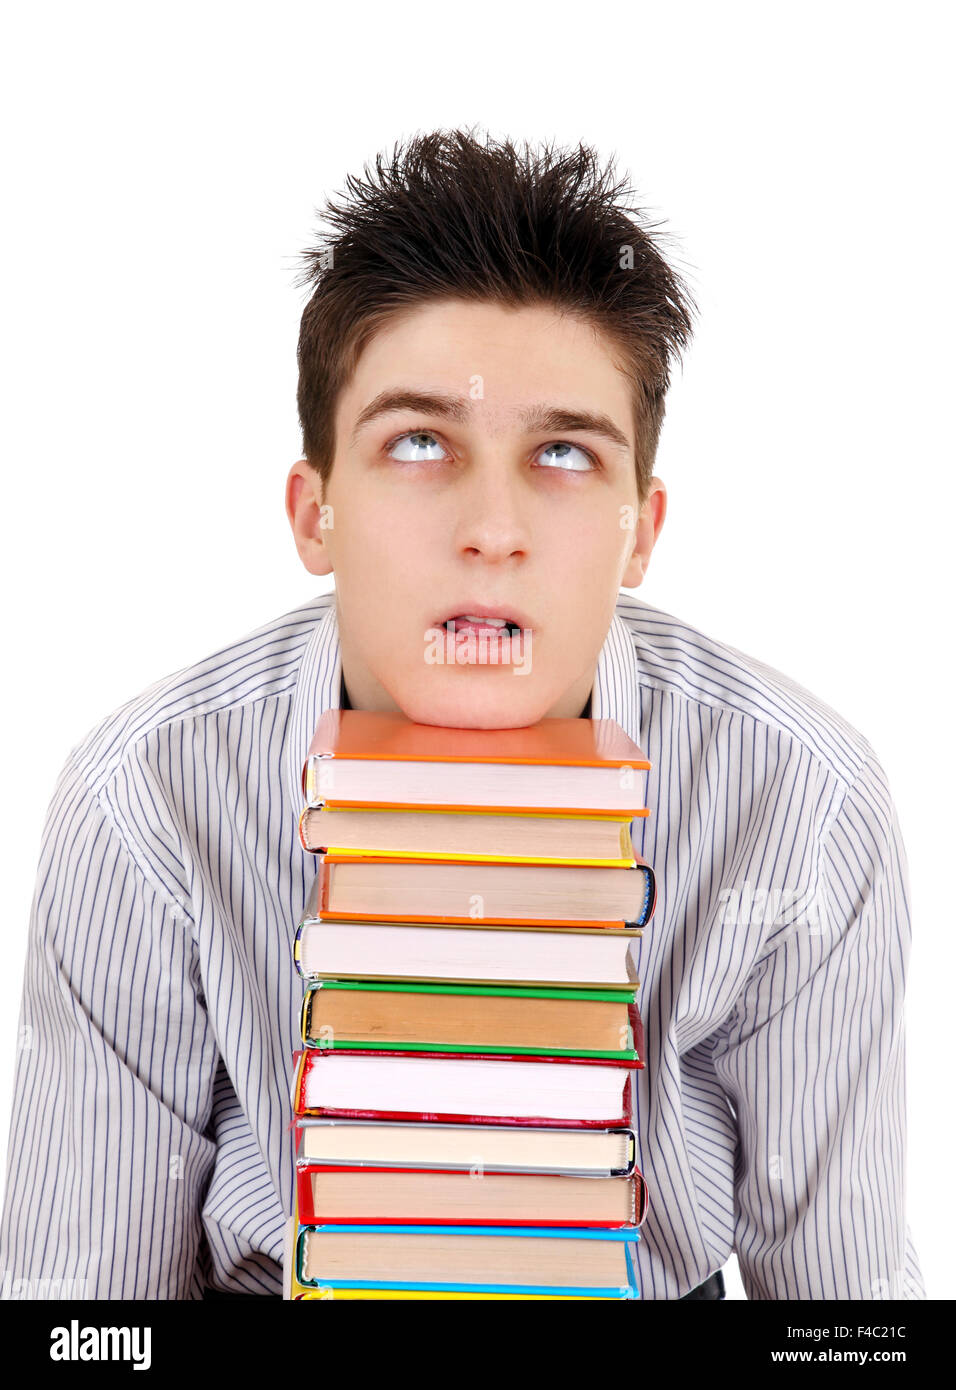 Annoyed Teenager with the Books Stock Photo